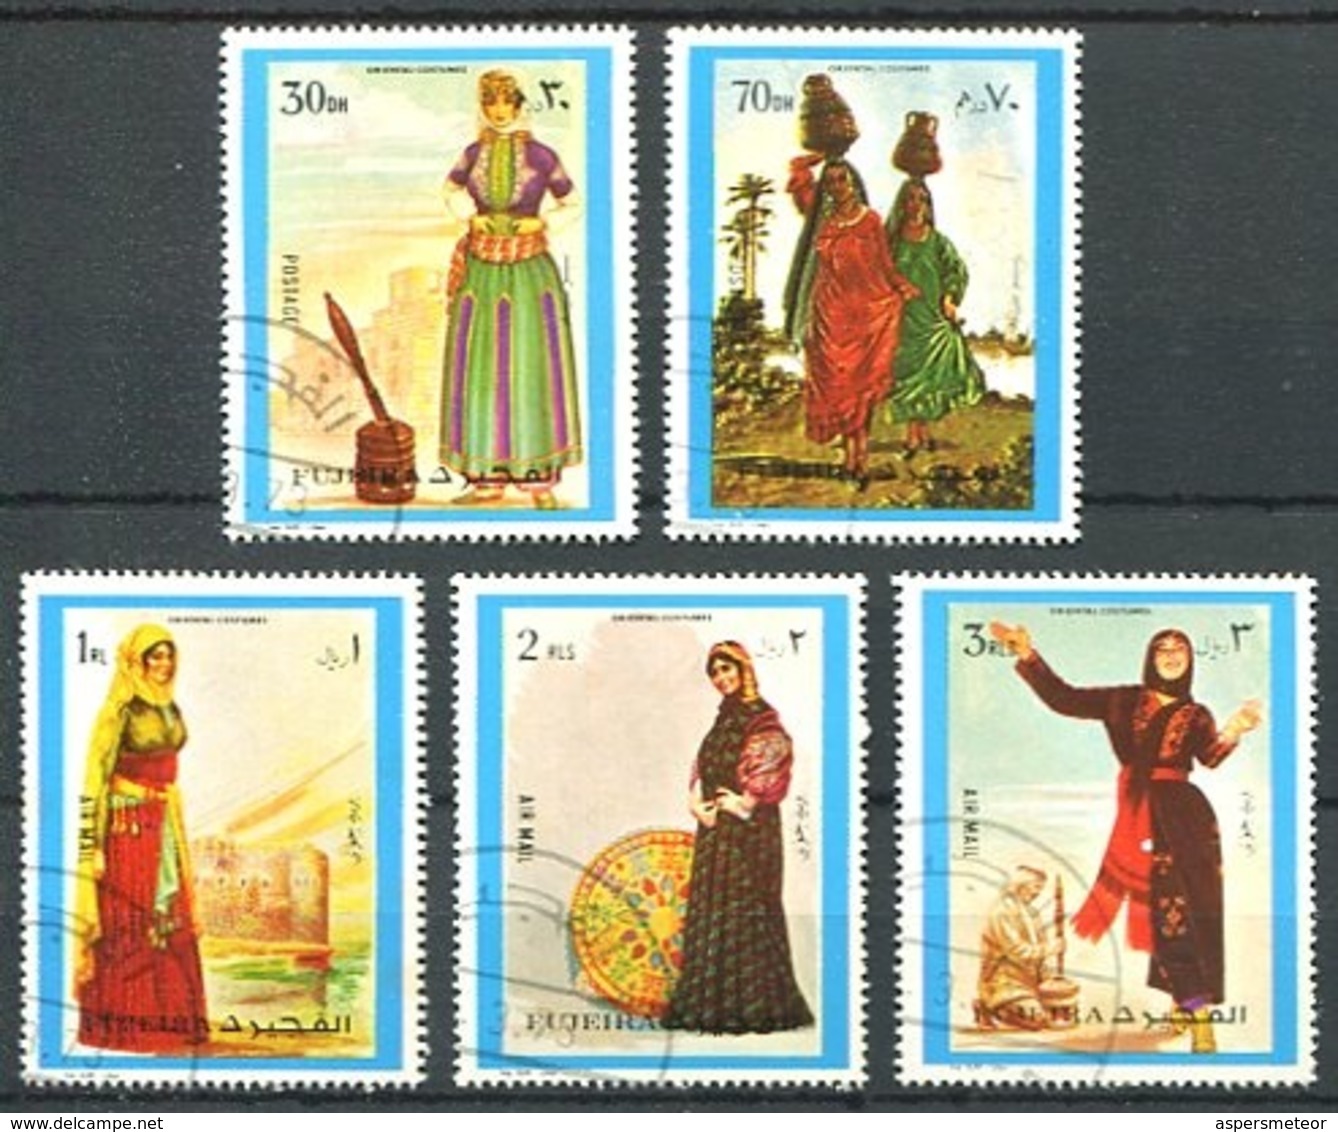 ORIENTAL COSTUMES. FUJEIRA 1973 MICHEL 1263 / 1267 COMPLETE SERIE OBLITERES - LILHU - Fujeira